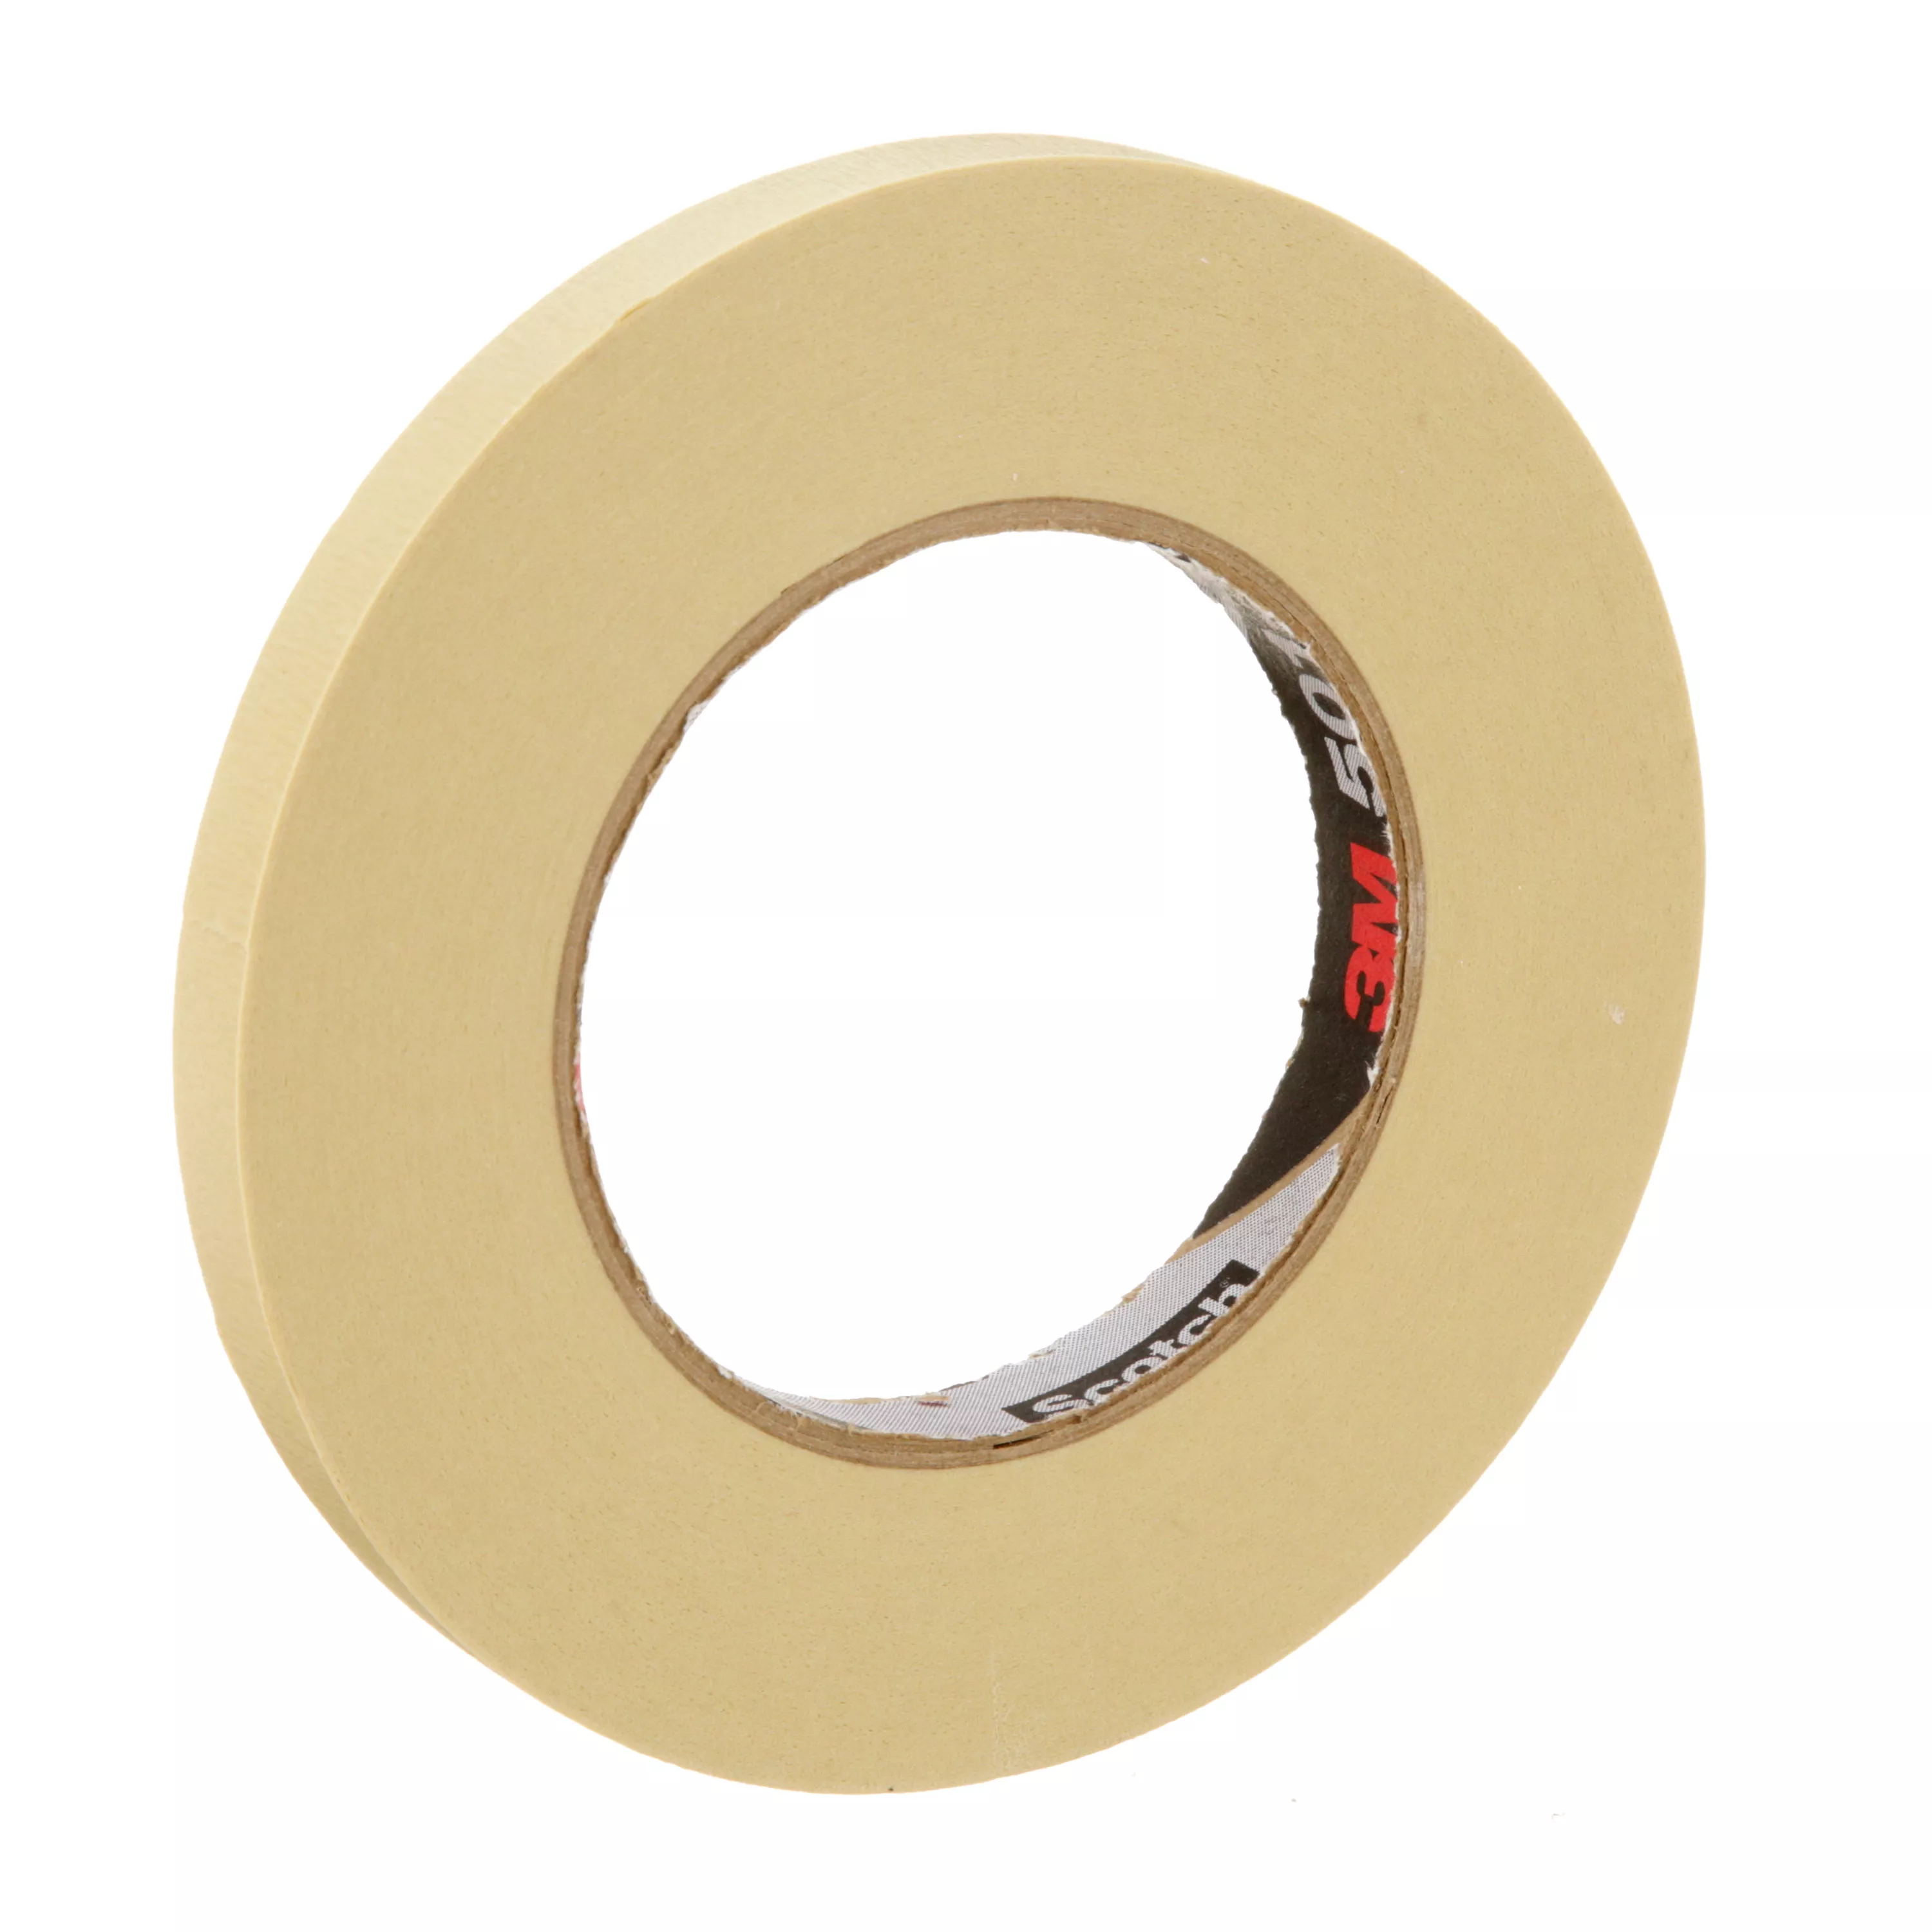 3M™ Specialty High Temperature Masking Tape 501+, Tan, 12 mm x 55 m, 7.3
mil, 72 Roll/Case